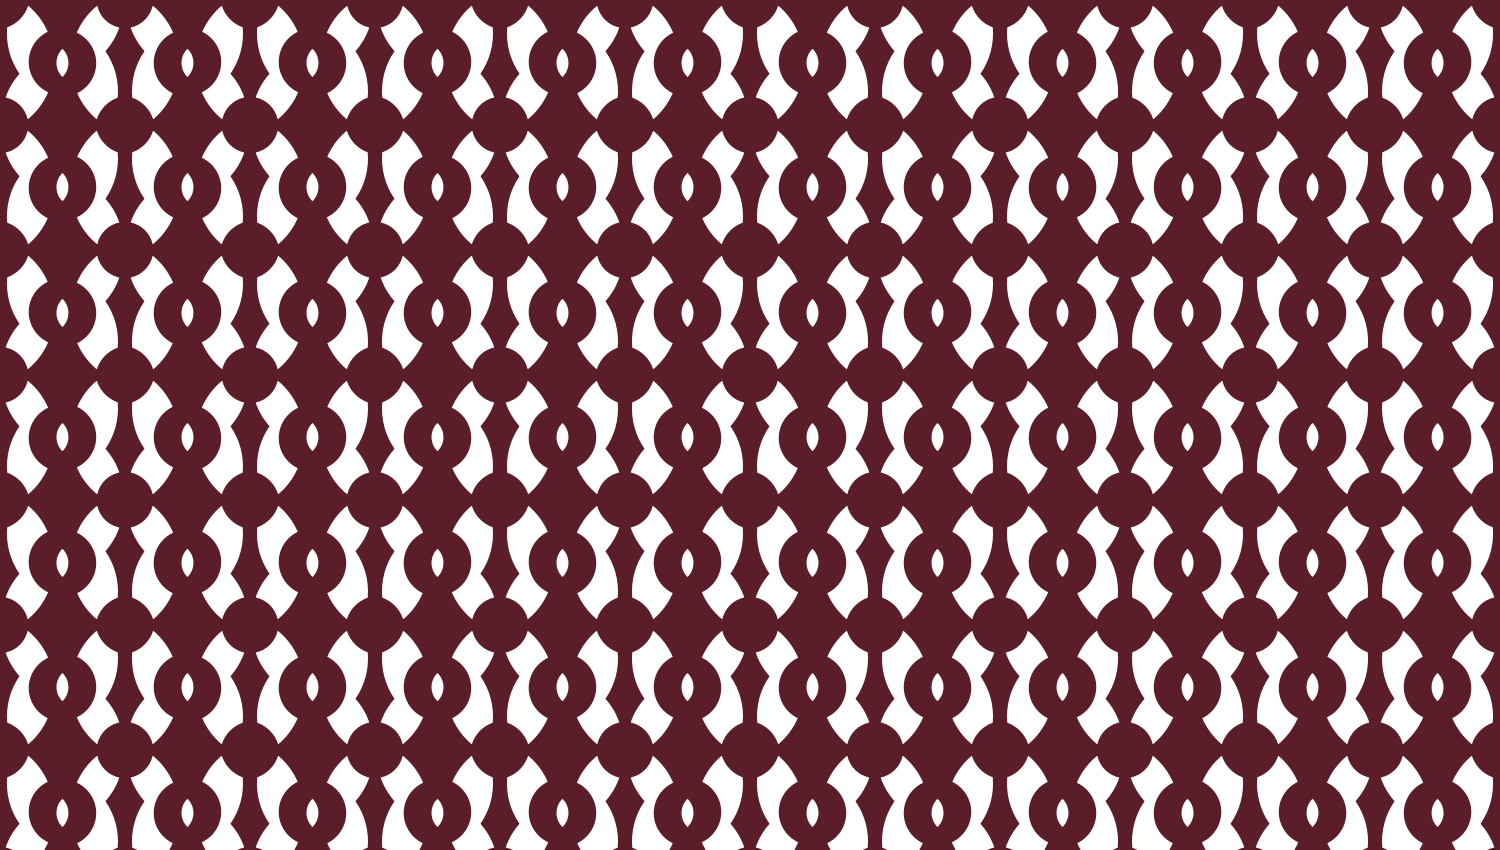 Parasoleil™ Jester Window© pattern displayed with a burgundy color overlay